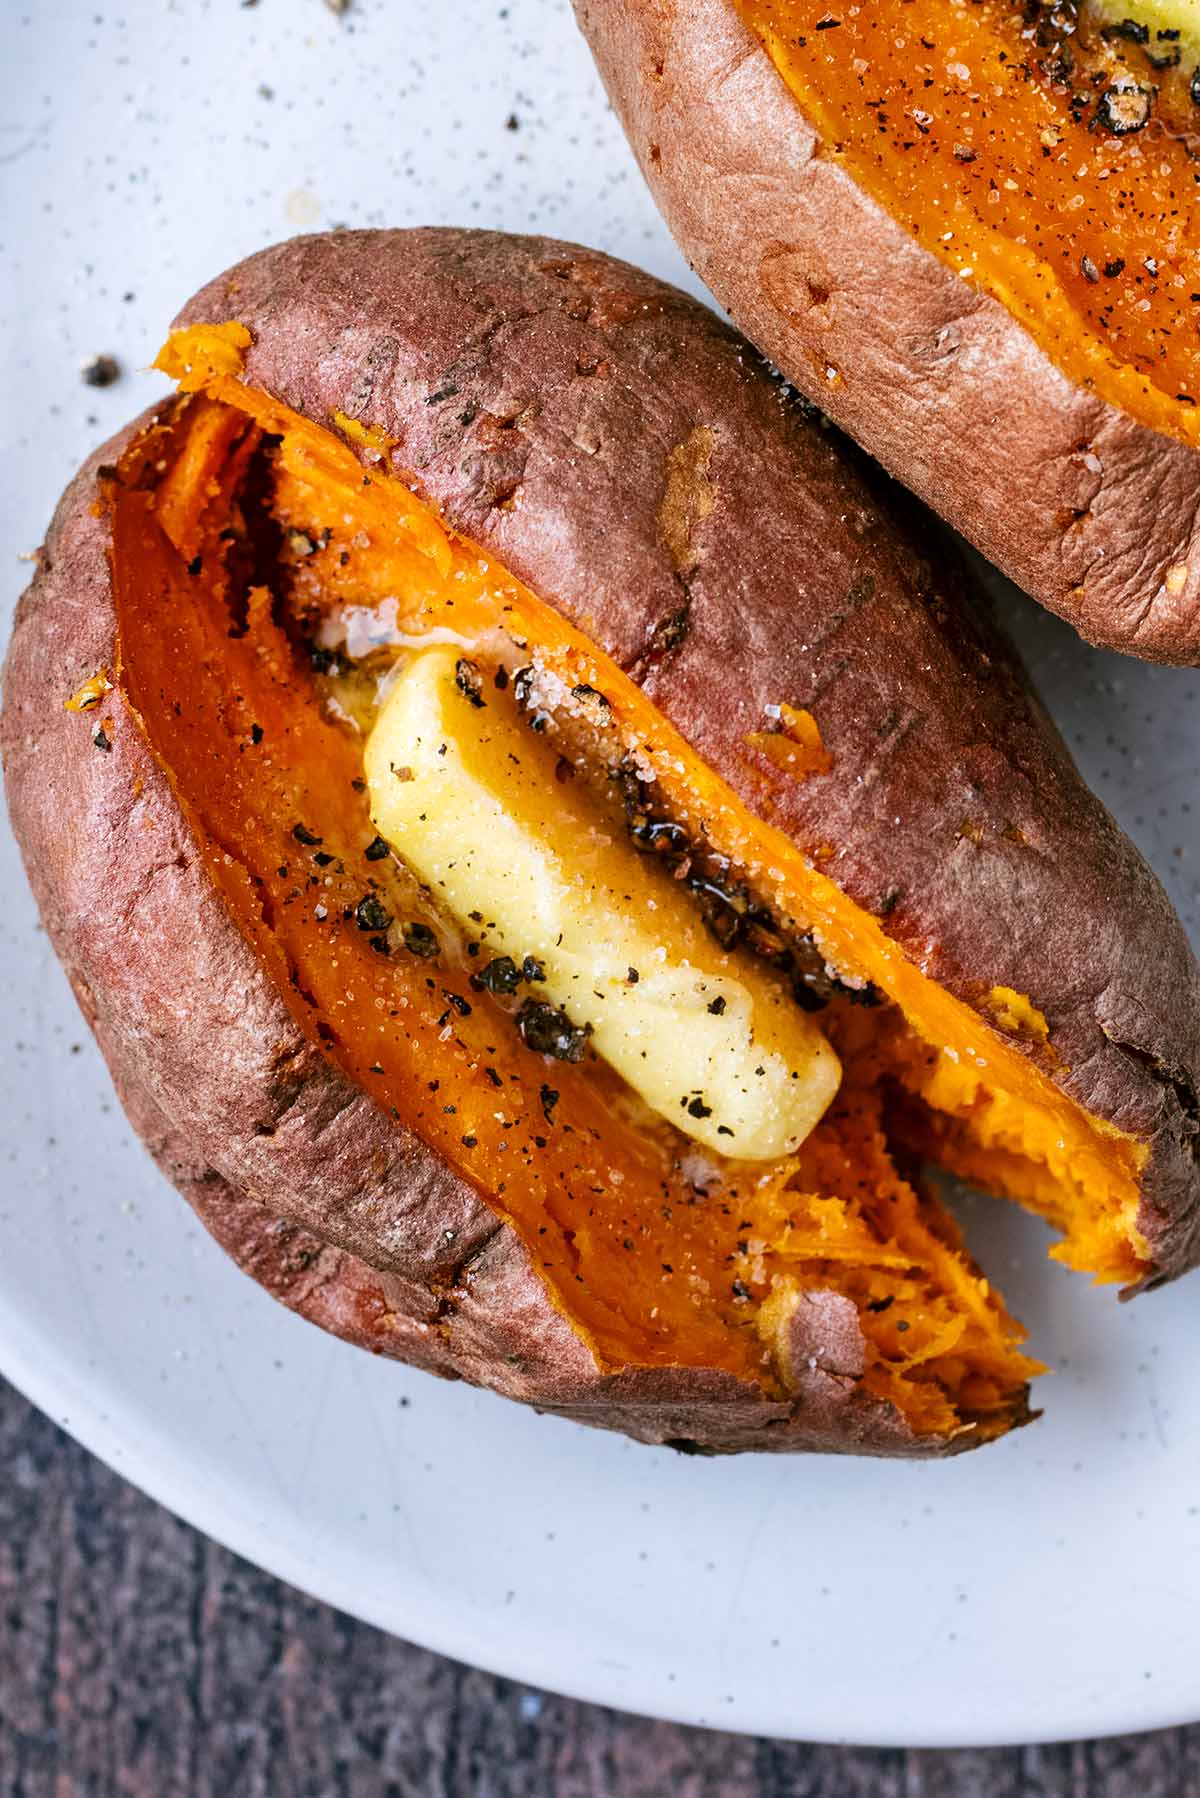 A pat of butter melting in a cooked sweet potato.